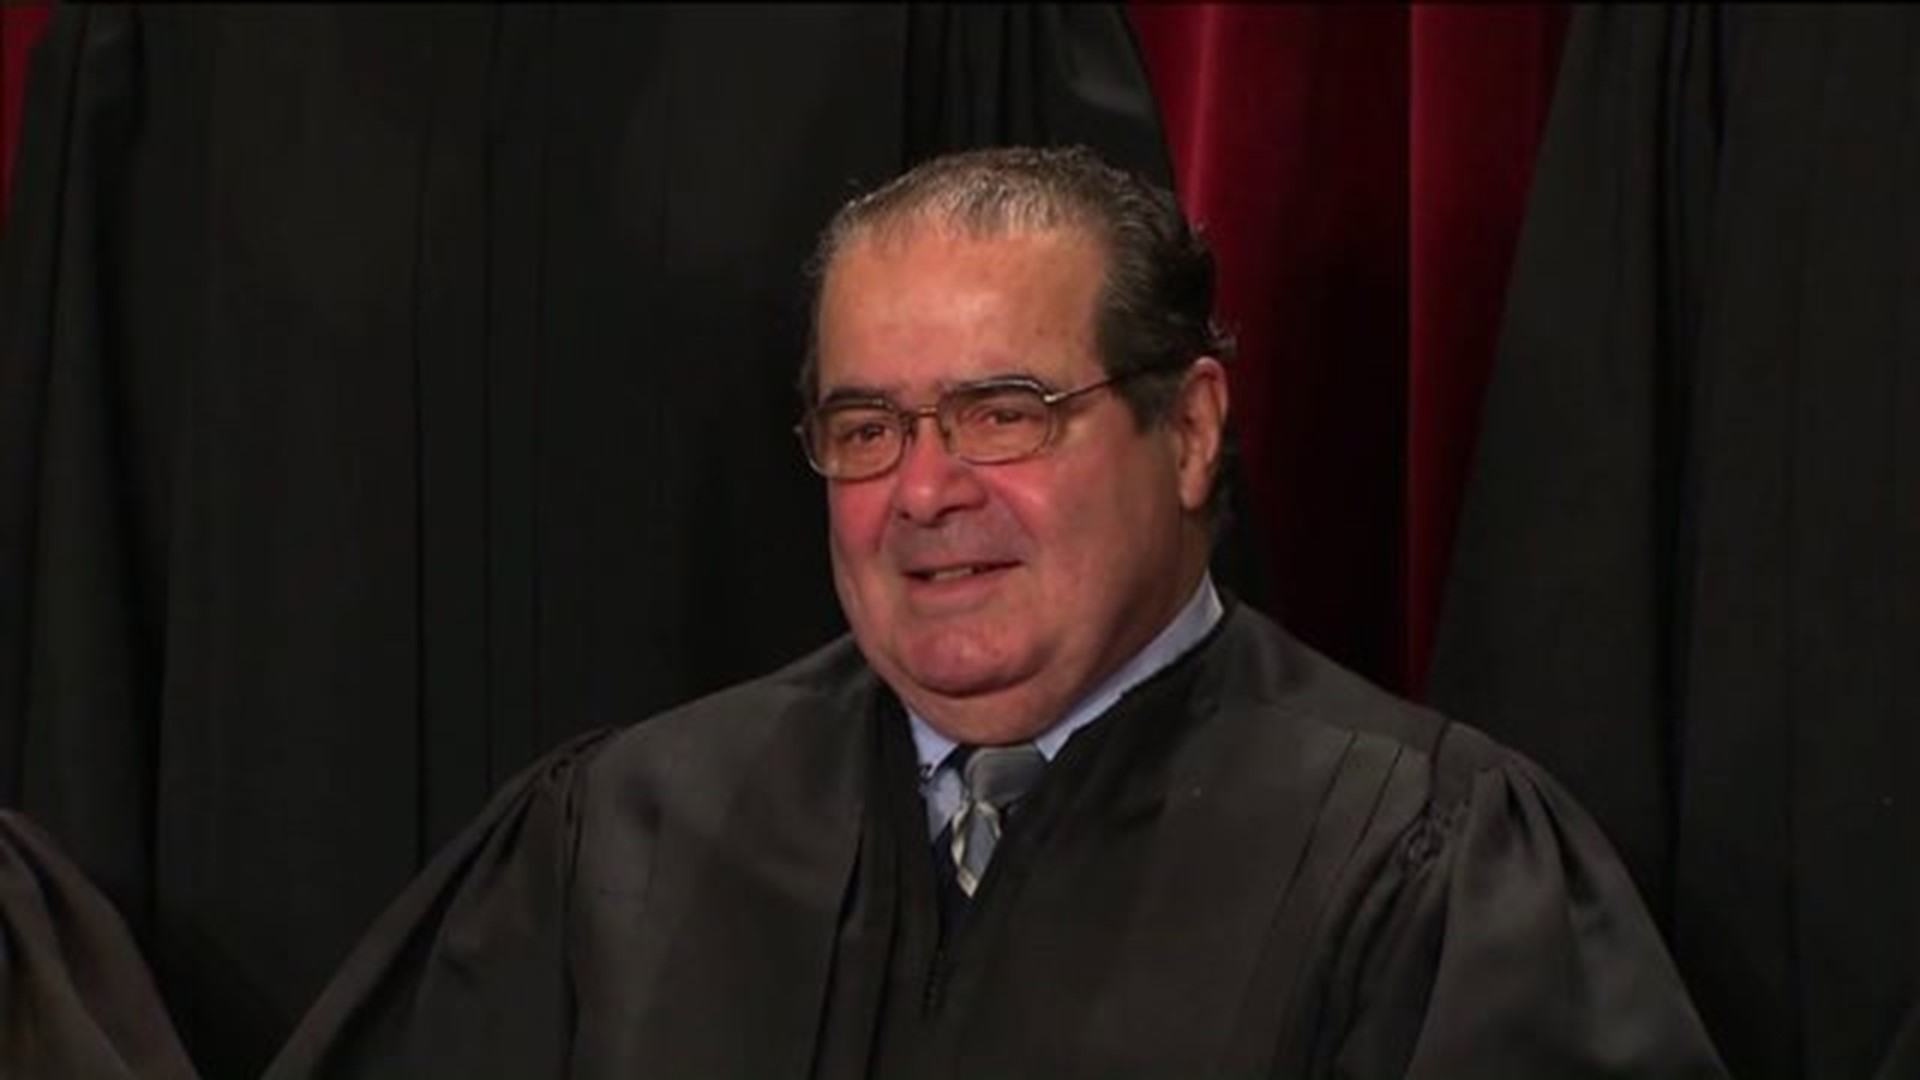 'The man himself was larger than life' - Remembering Justice Scalia